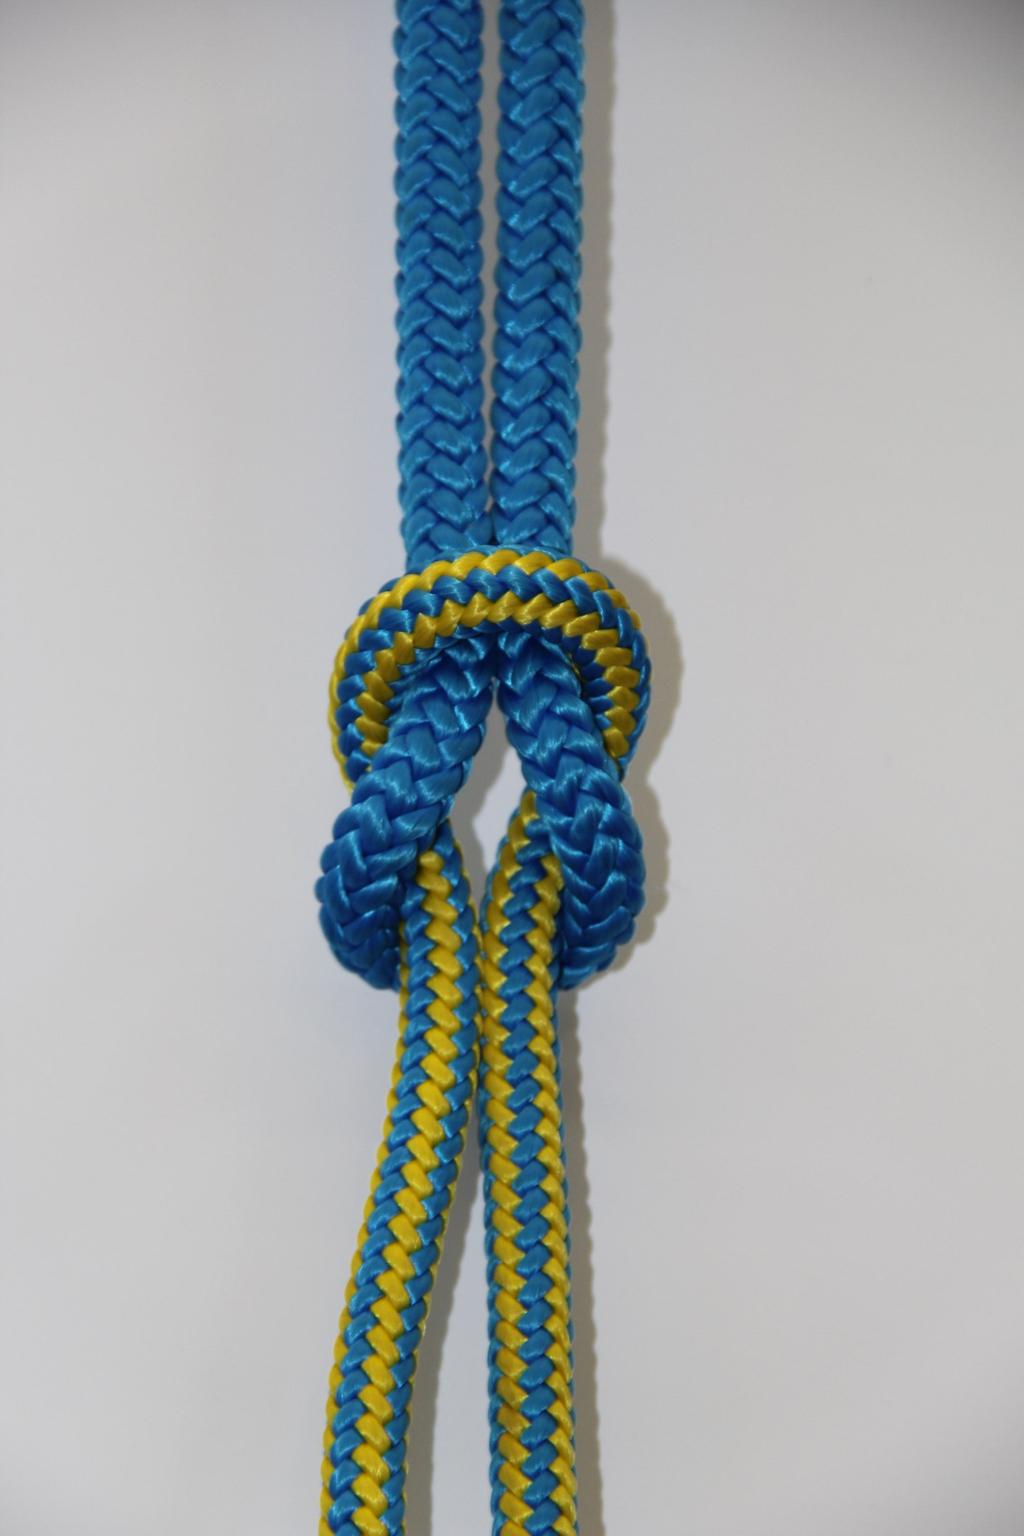 Square knot: often used to tie two ropes together, in non-critical situations (sending a rigging rope to a climber in the tree).